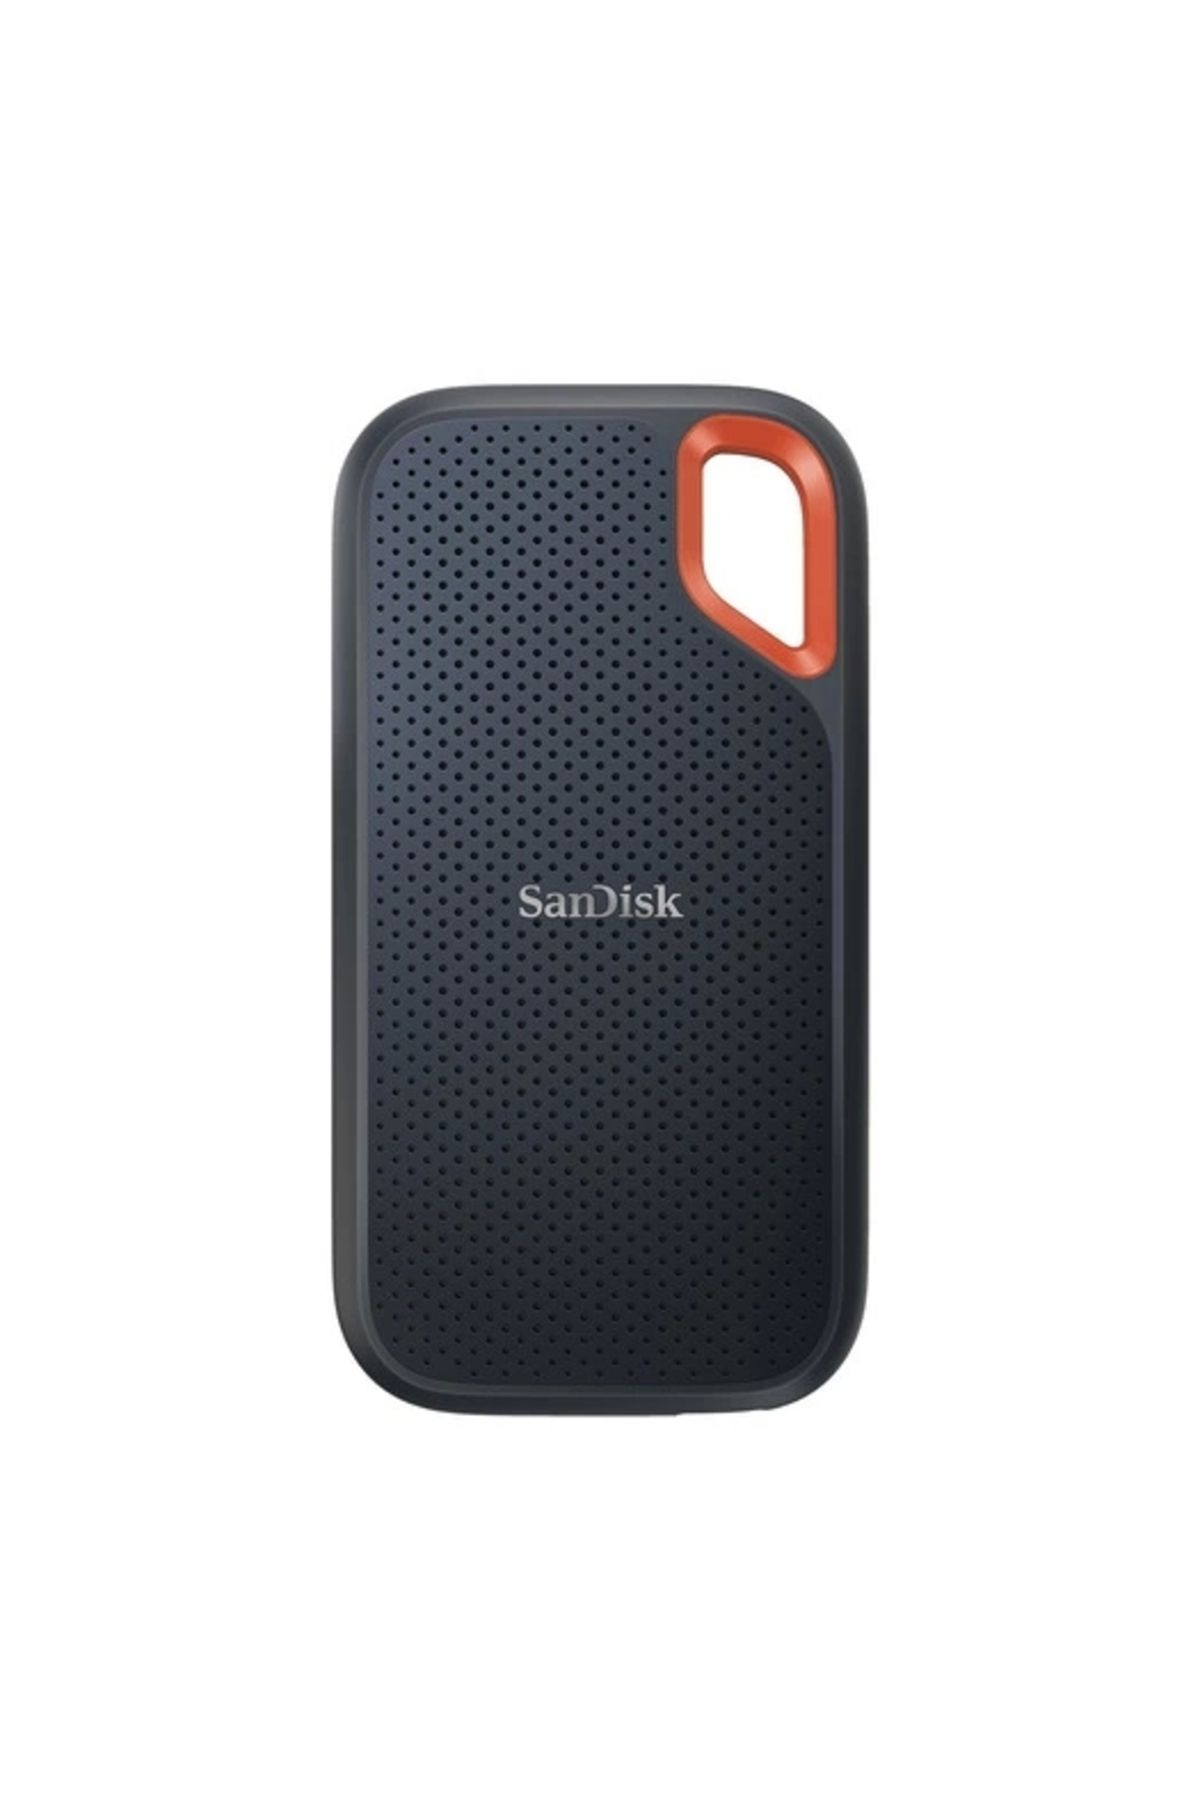 Sandisk Extreme Portable Ssd 1tb